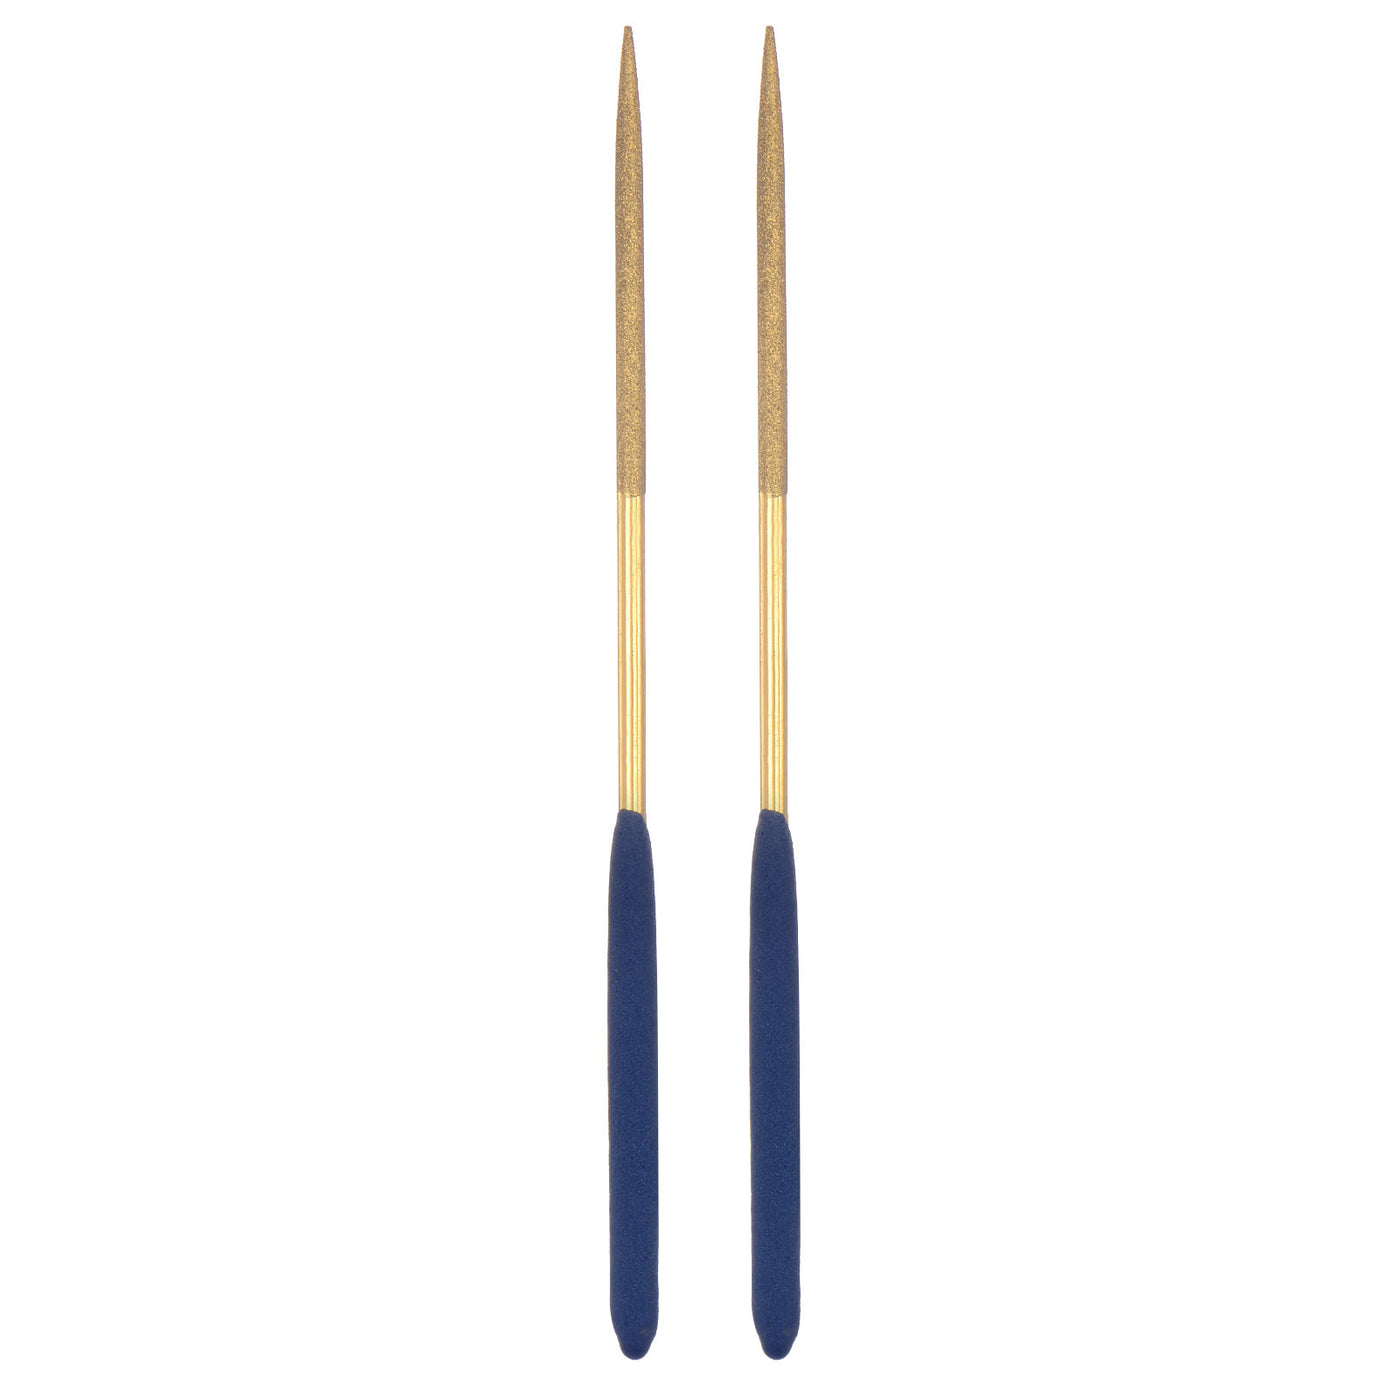 Uxcell Uxcell 5mm x 180mm Titanium Coated Round Diamond Needle Files with TPU Handle 2pcs